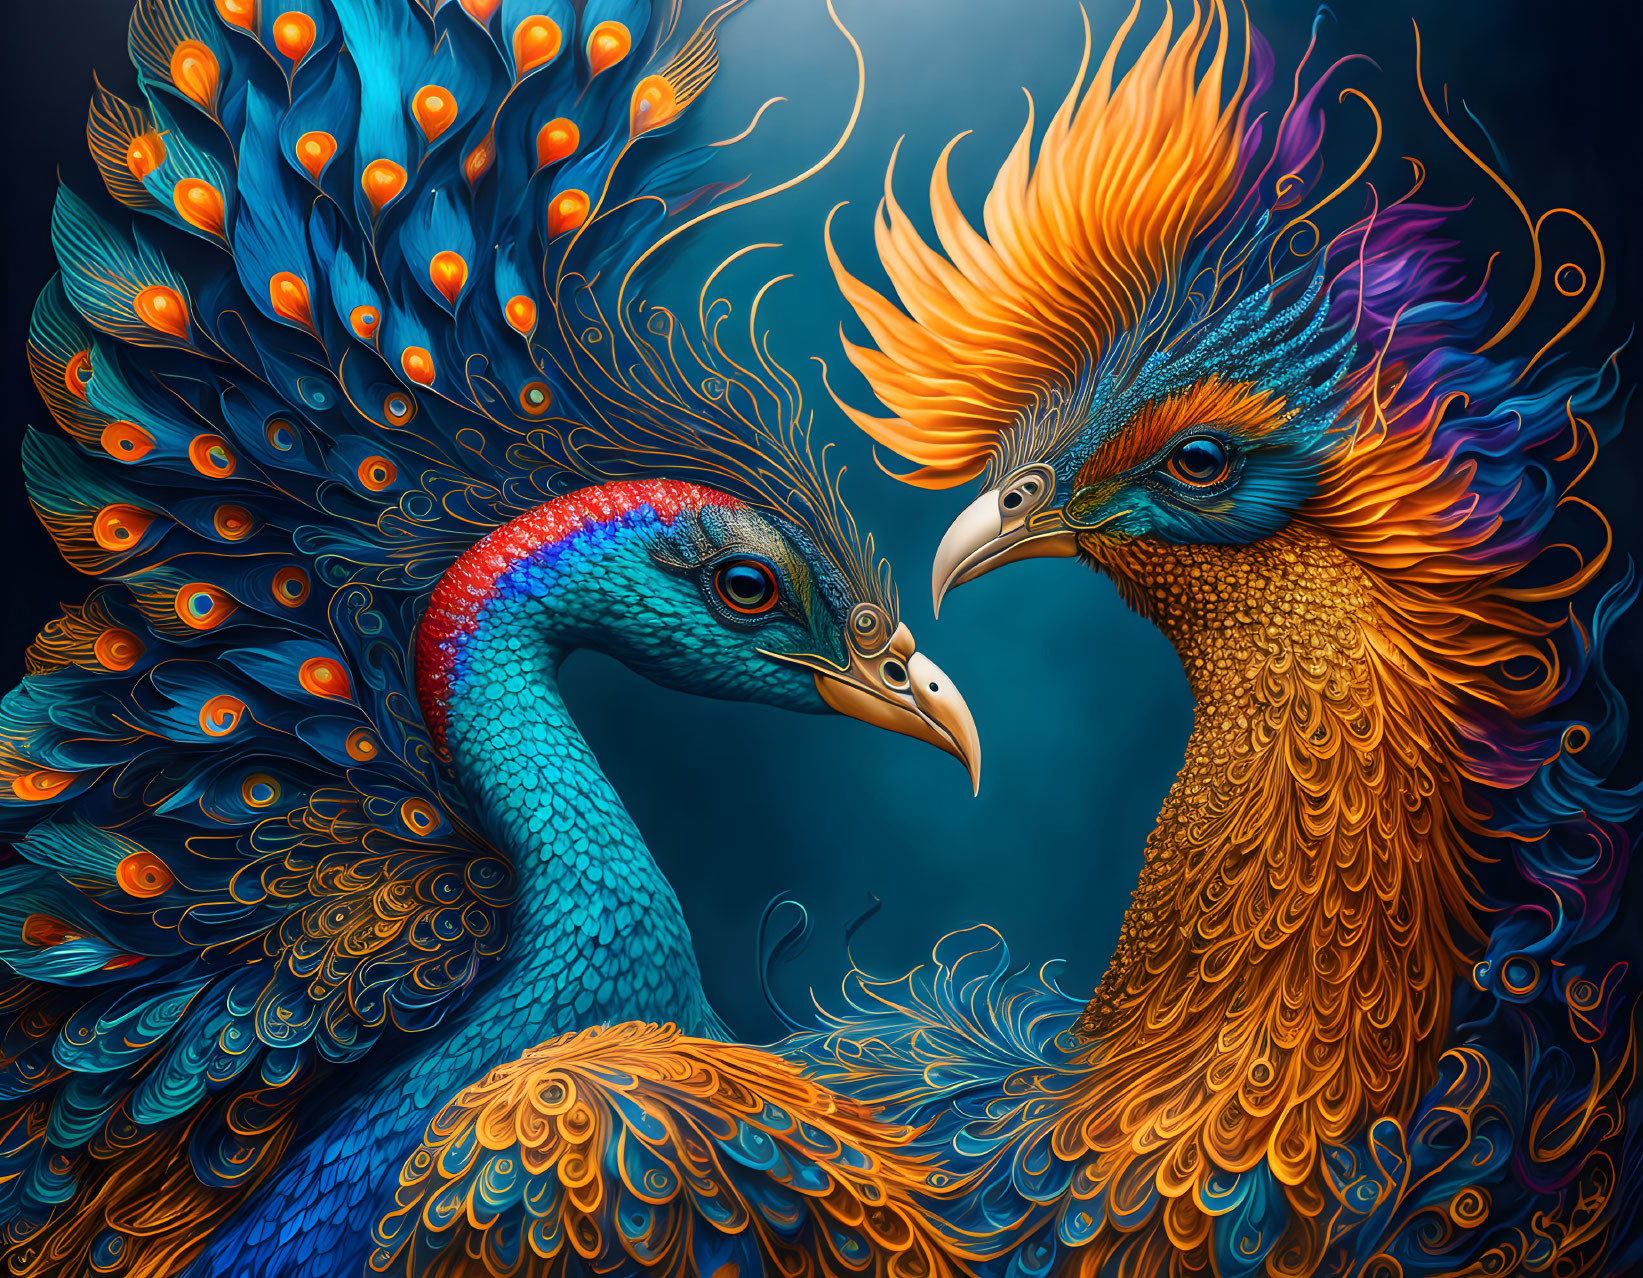 Vibrantly colored stylized peacocks with intricate feathers